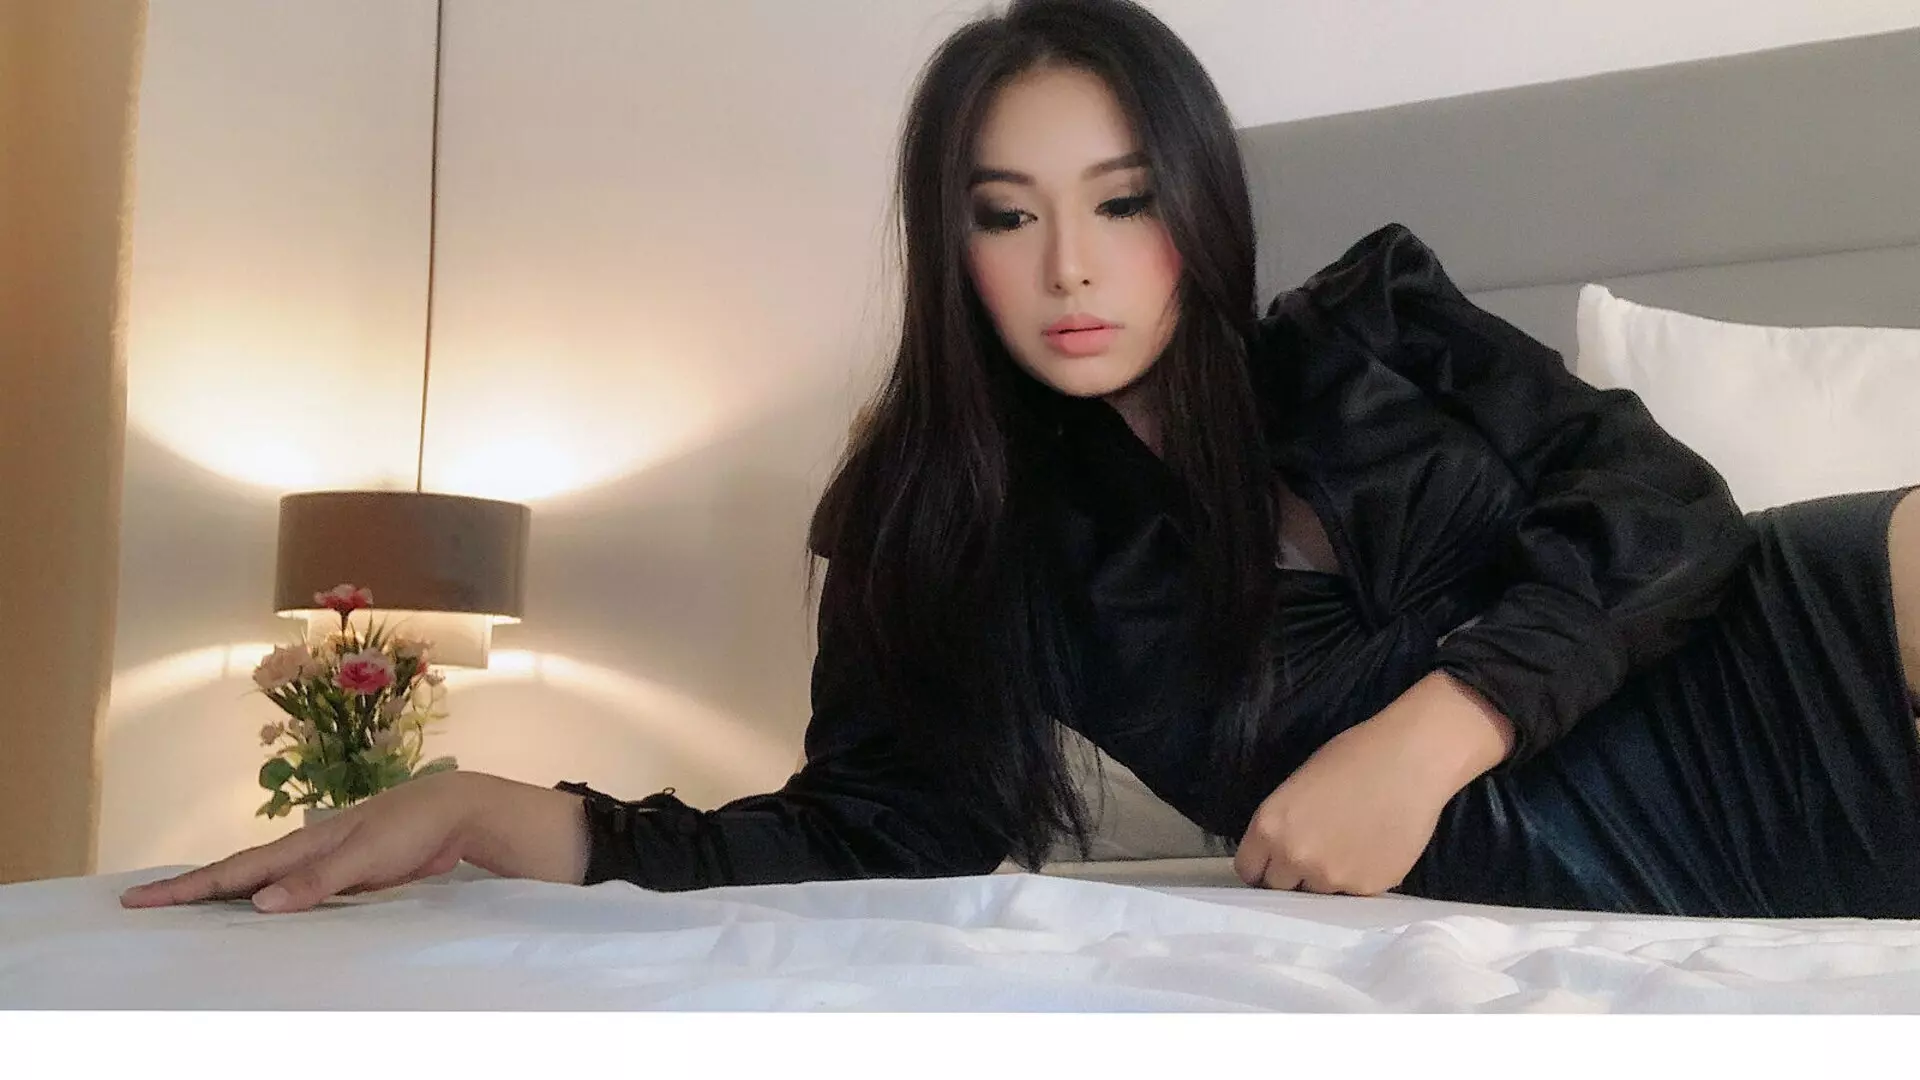 Join JenniePark Private Chat